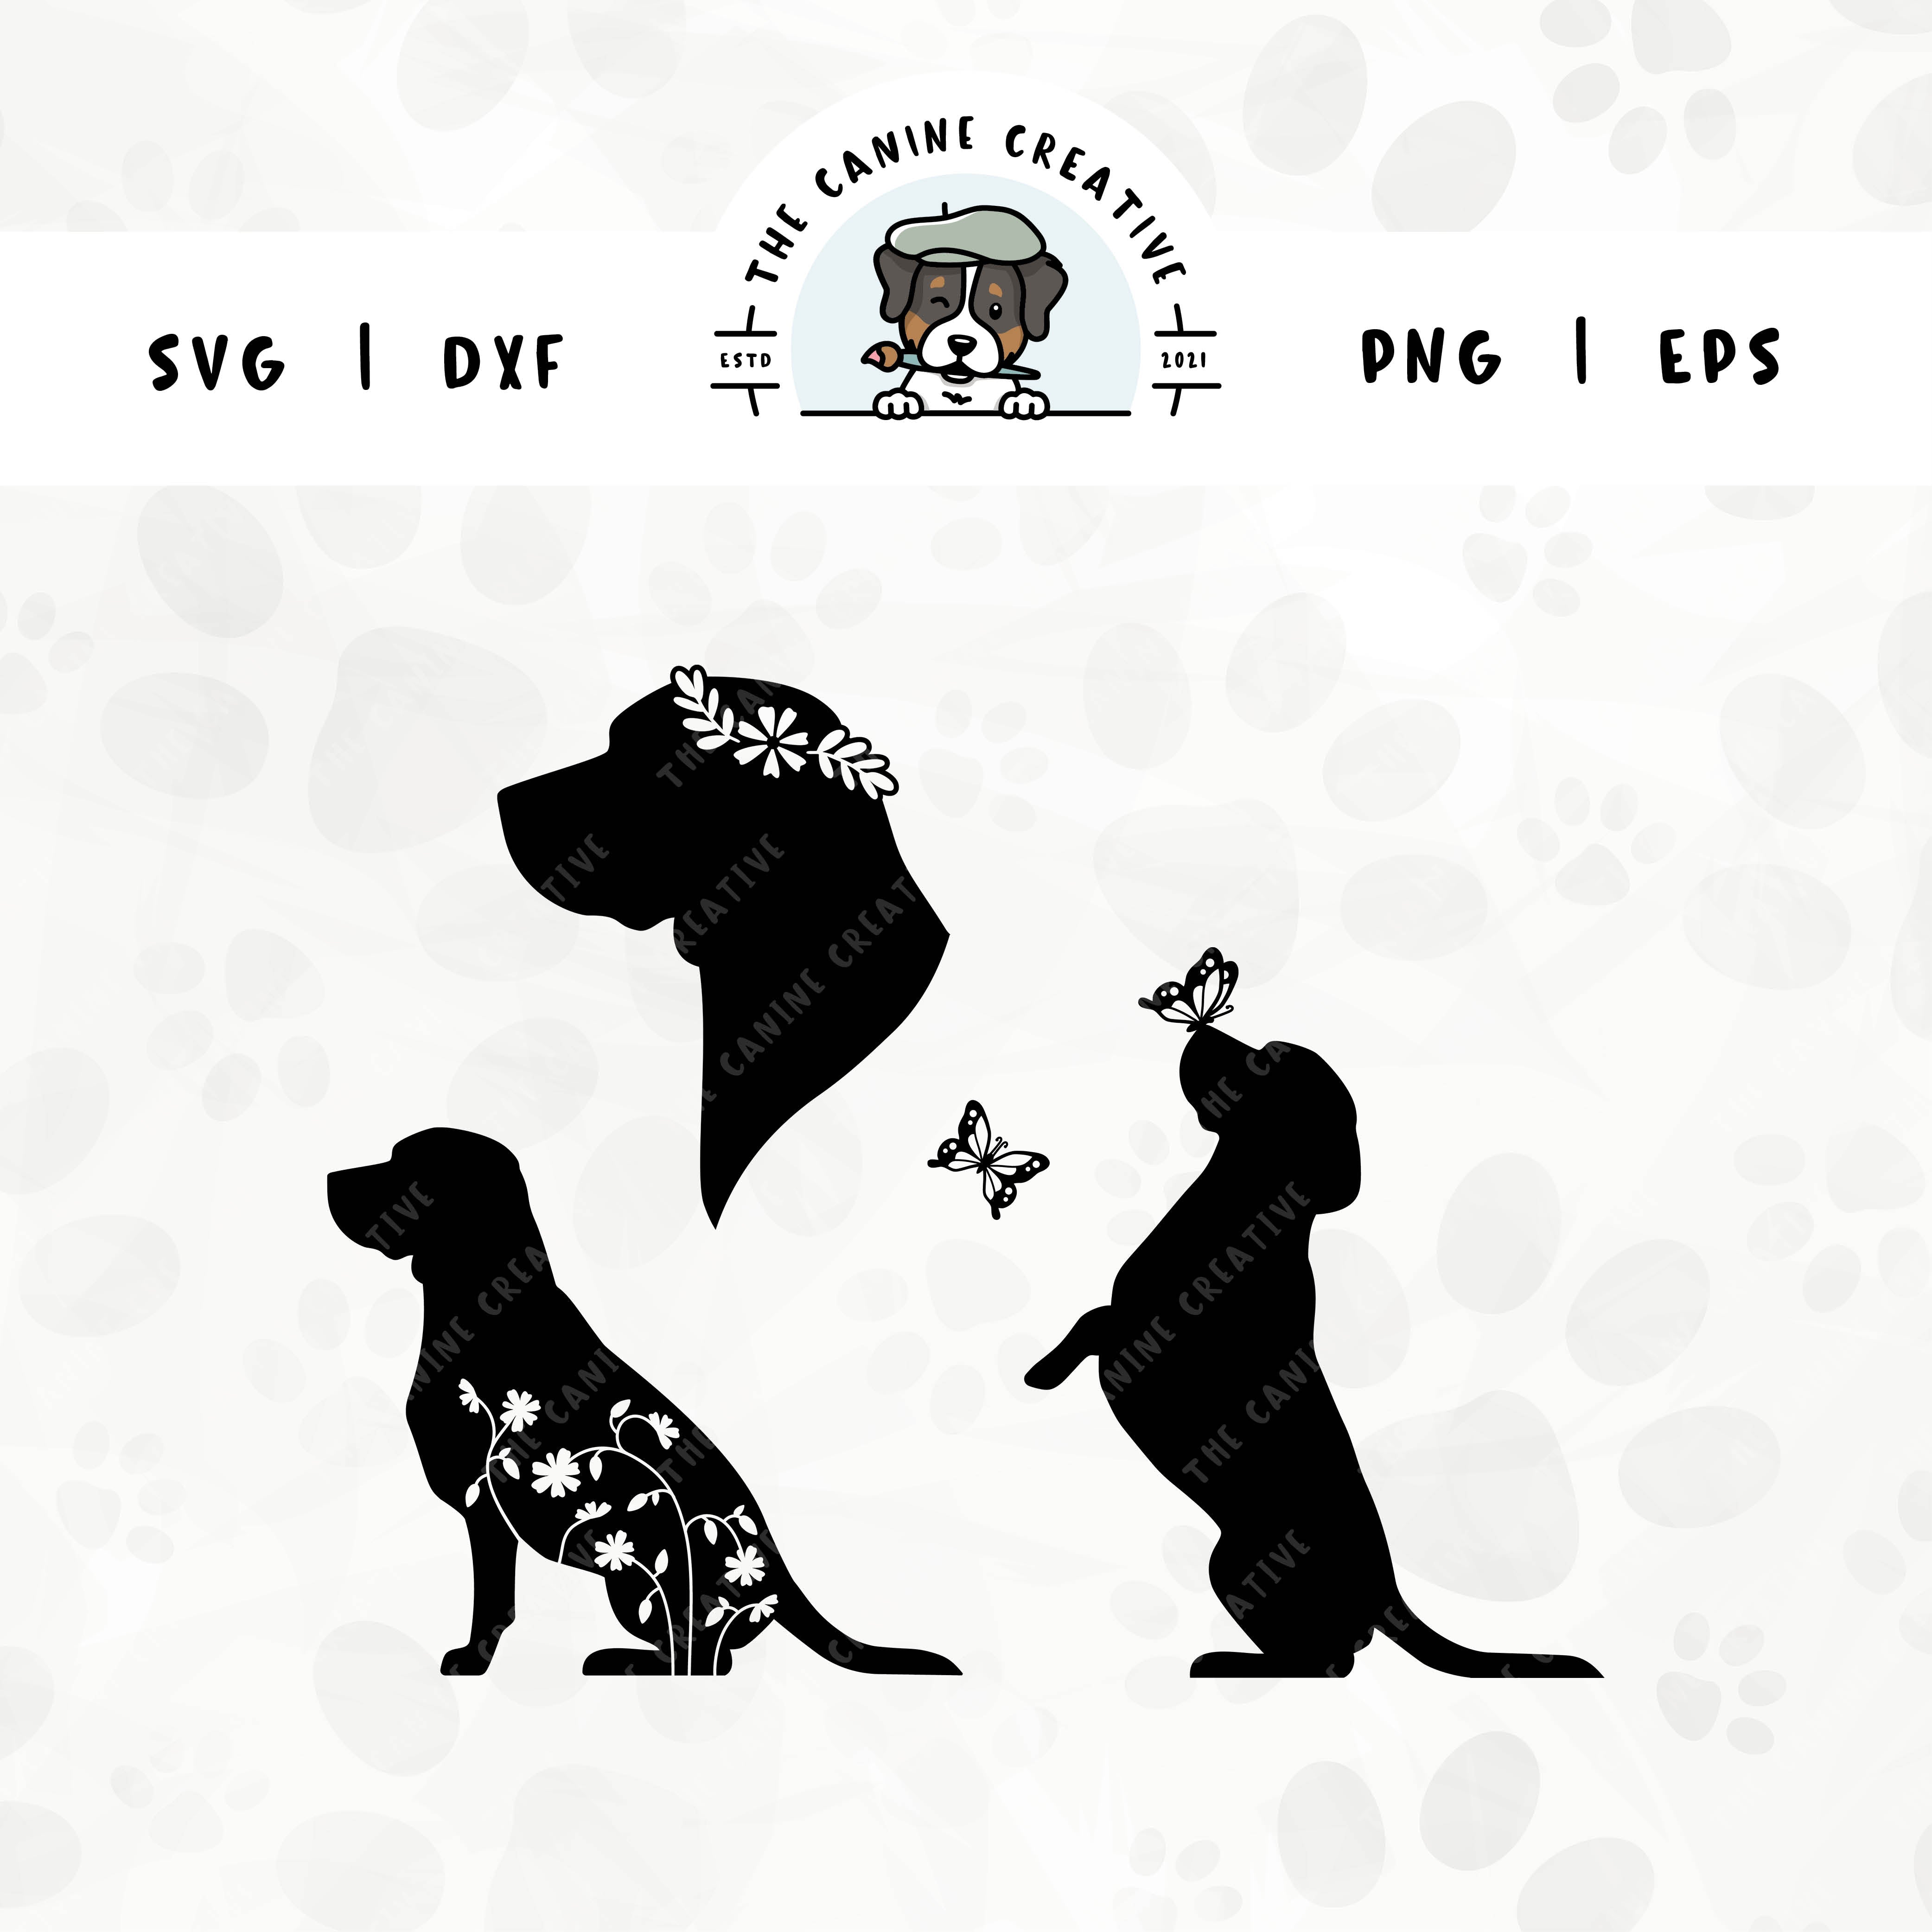 This 3-pack Beagle silhouette bundle features a head portrait of a dog wearing a floral crown, a sitting dog with inset flowers, and a dog interacting with butterflies. File formats include: SVG, DXF, PNG, and EPS.